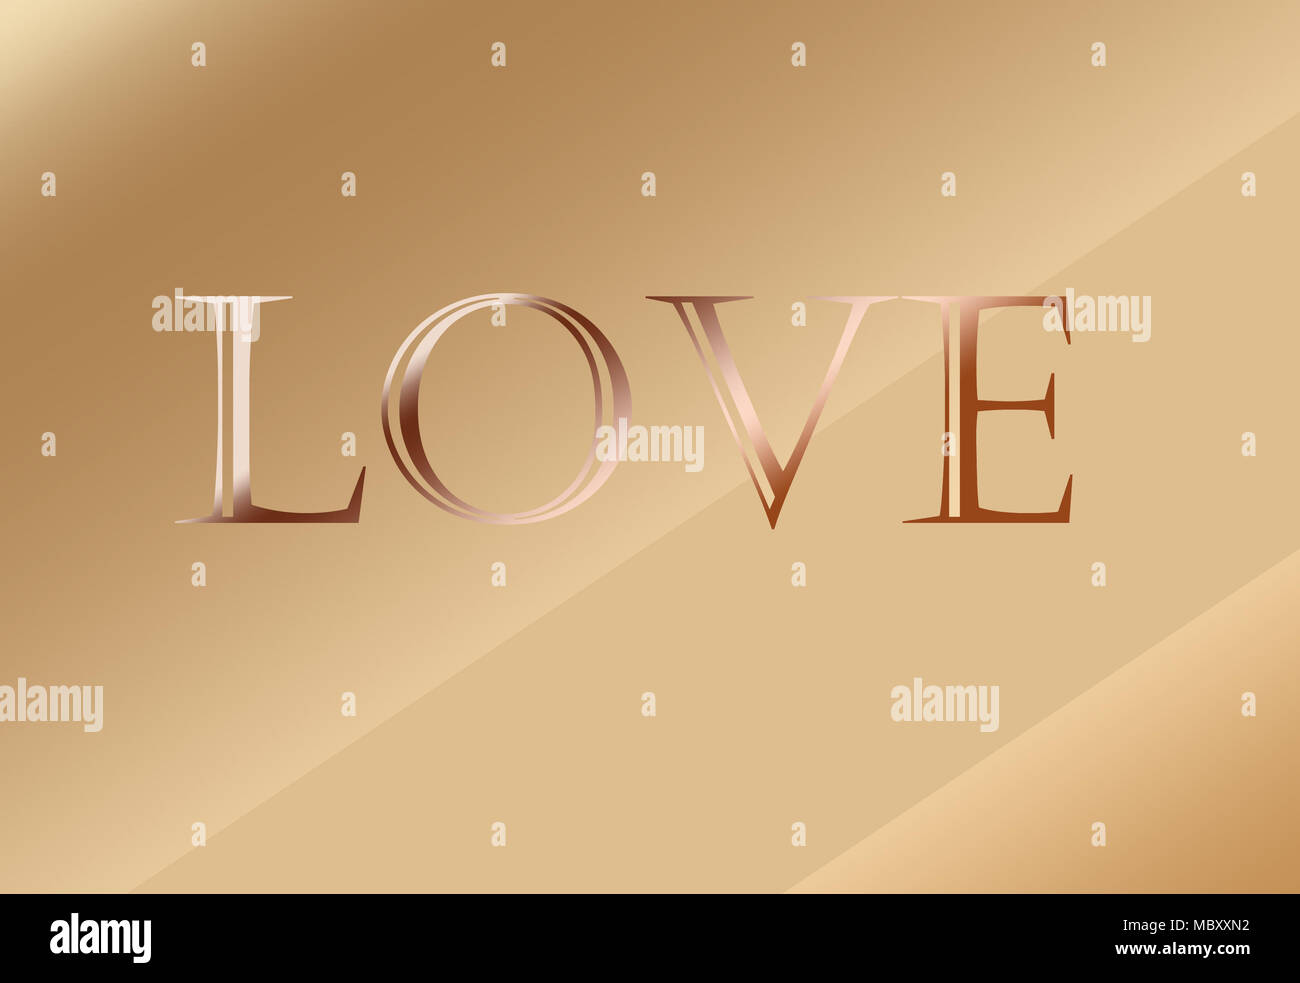 The word LOVE across a copper colored background Stock Photo